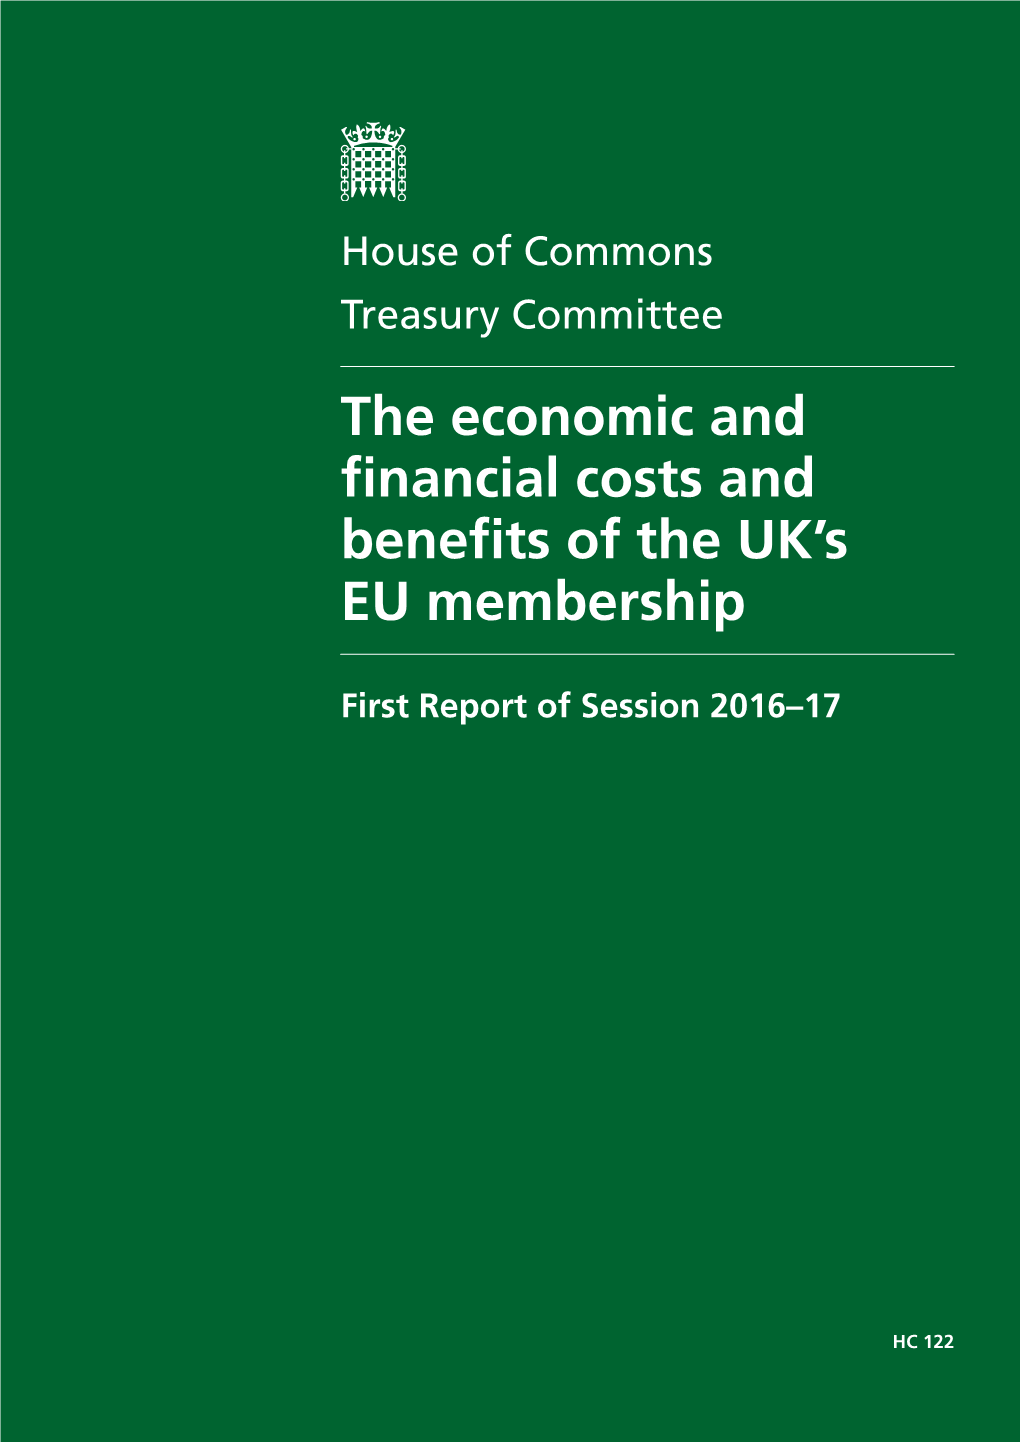 The Economic and Financial Costs and Benefits of the UK's EU